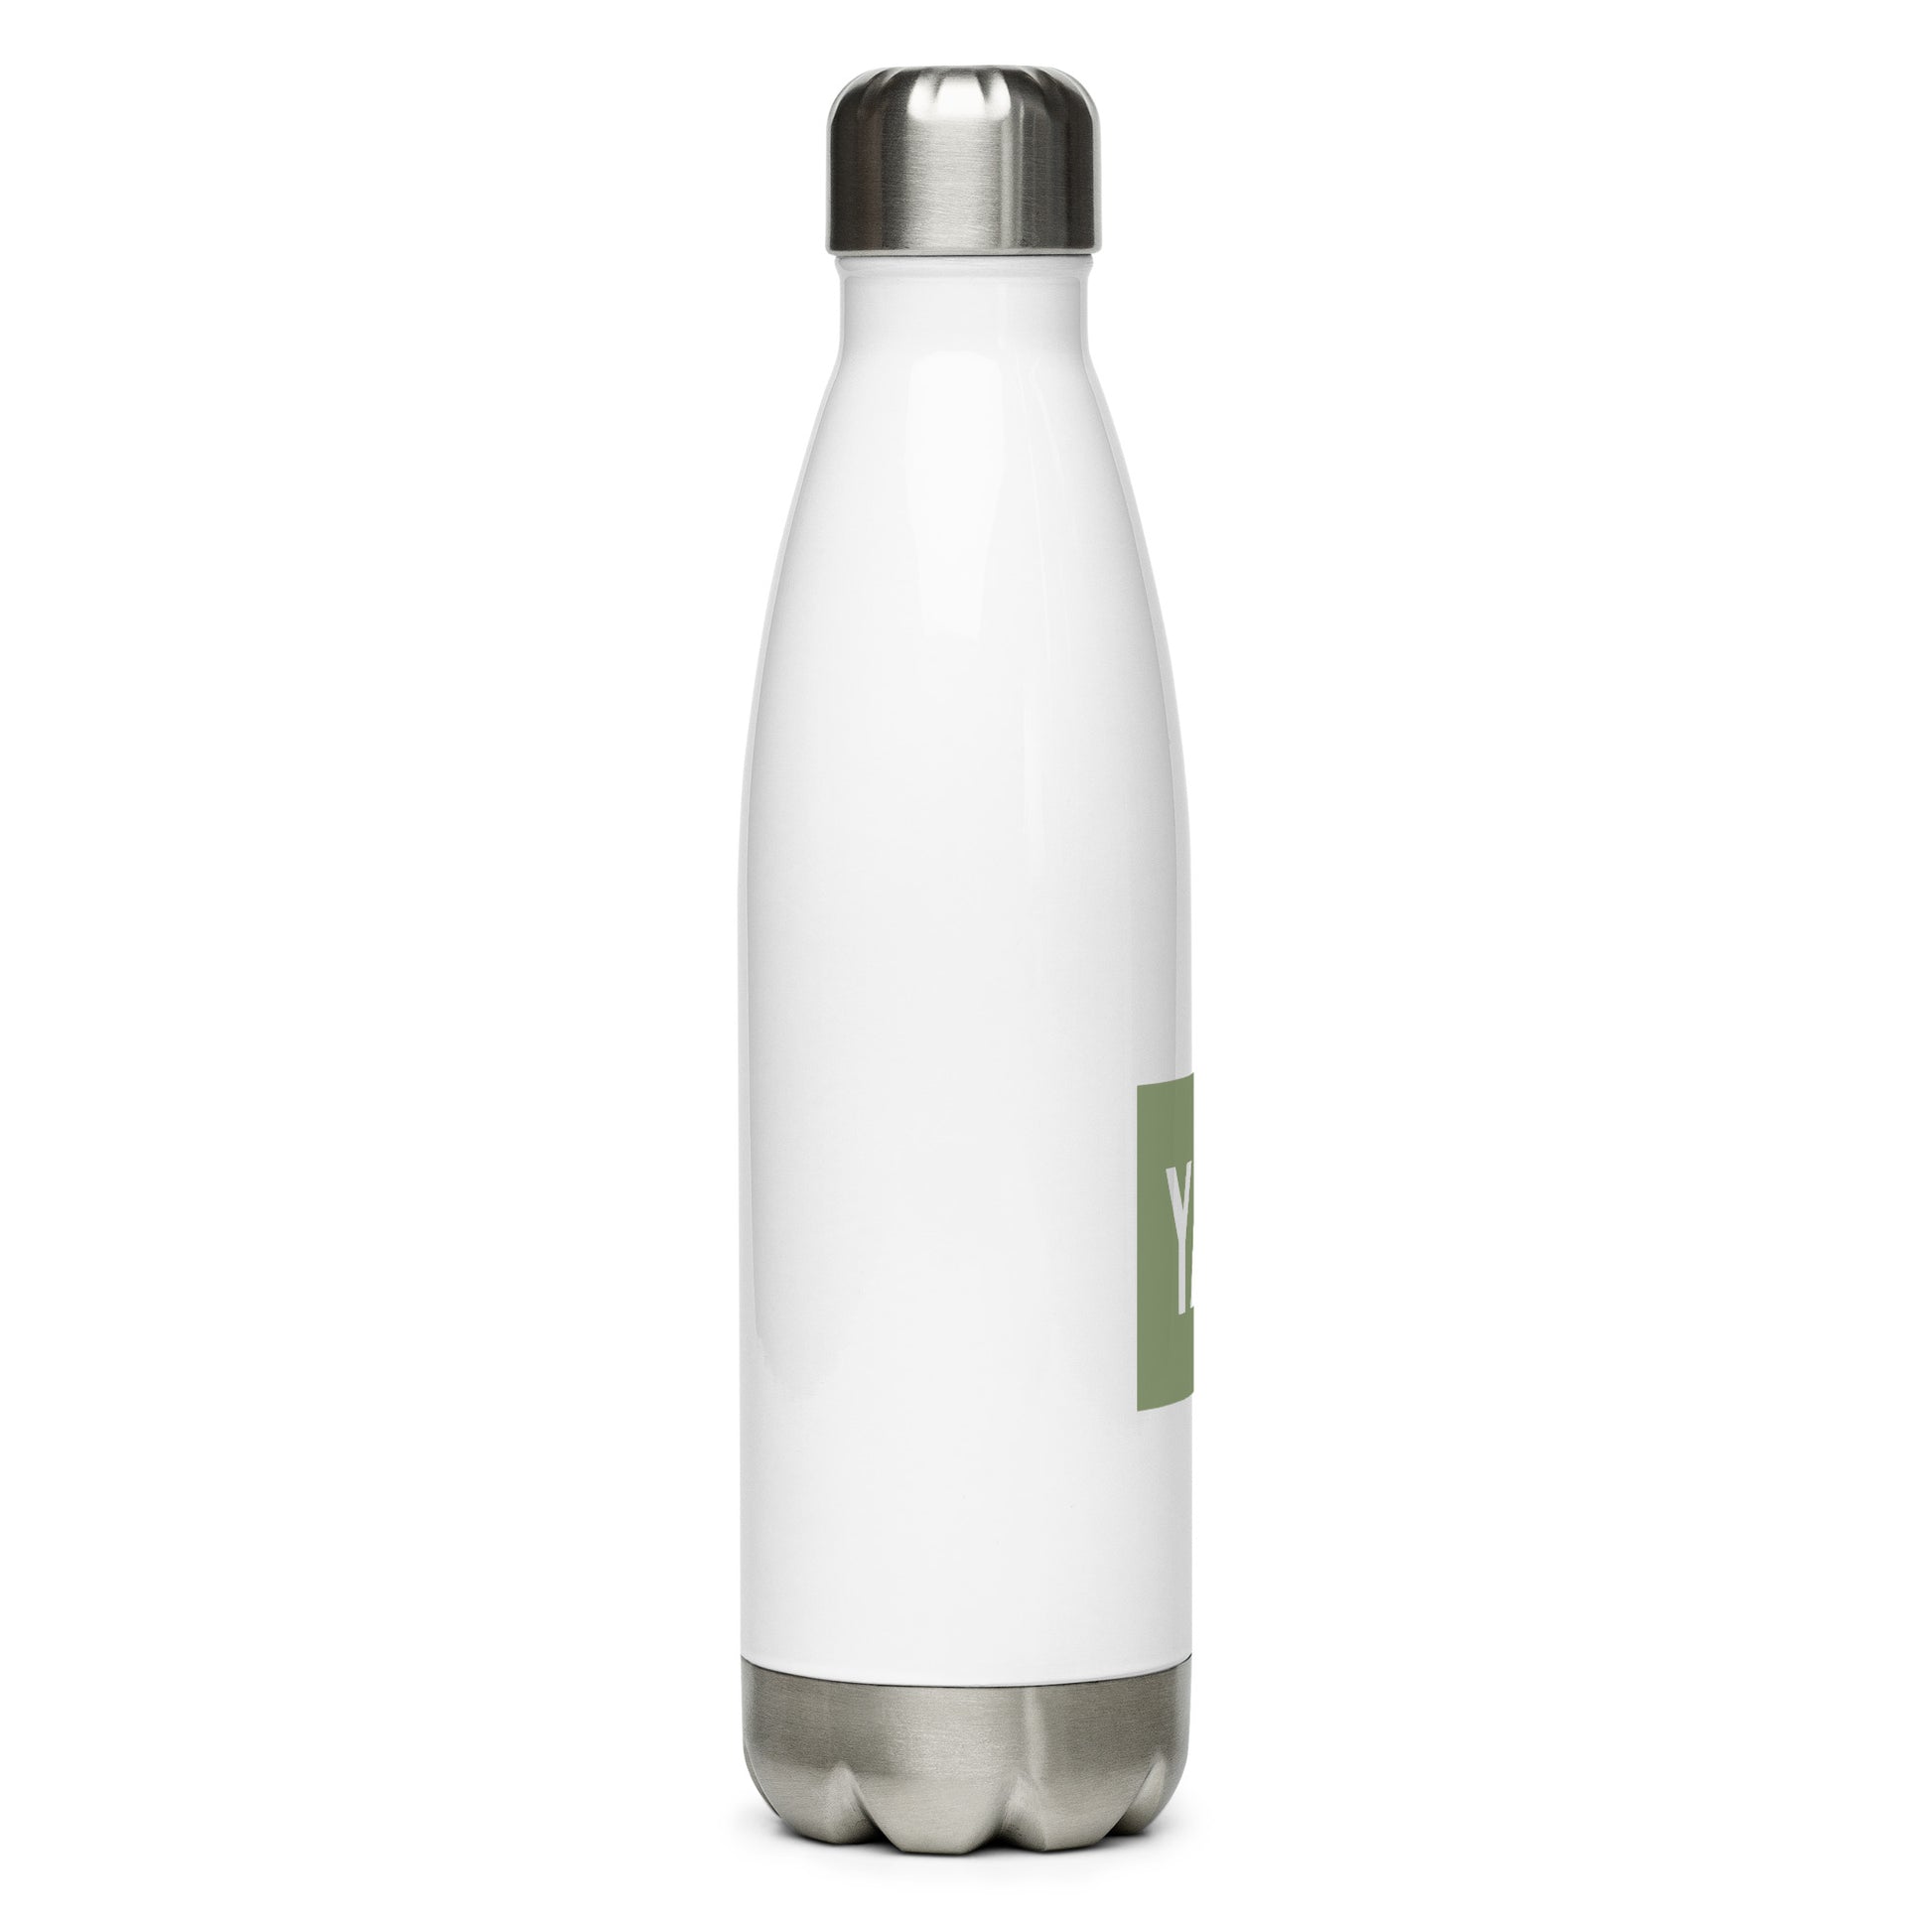 Aviation Gift Water Bottle - Camo Green • YAM Sault-Ste-Marie • YHM Designs - Image 07